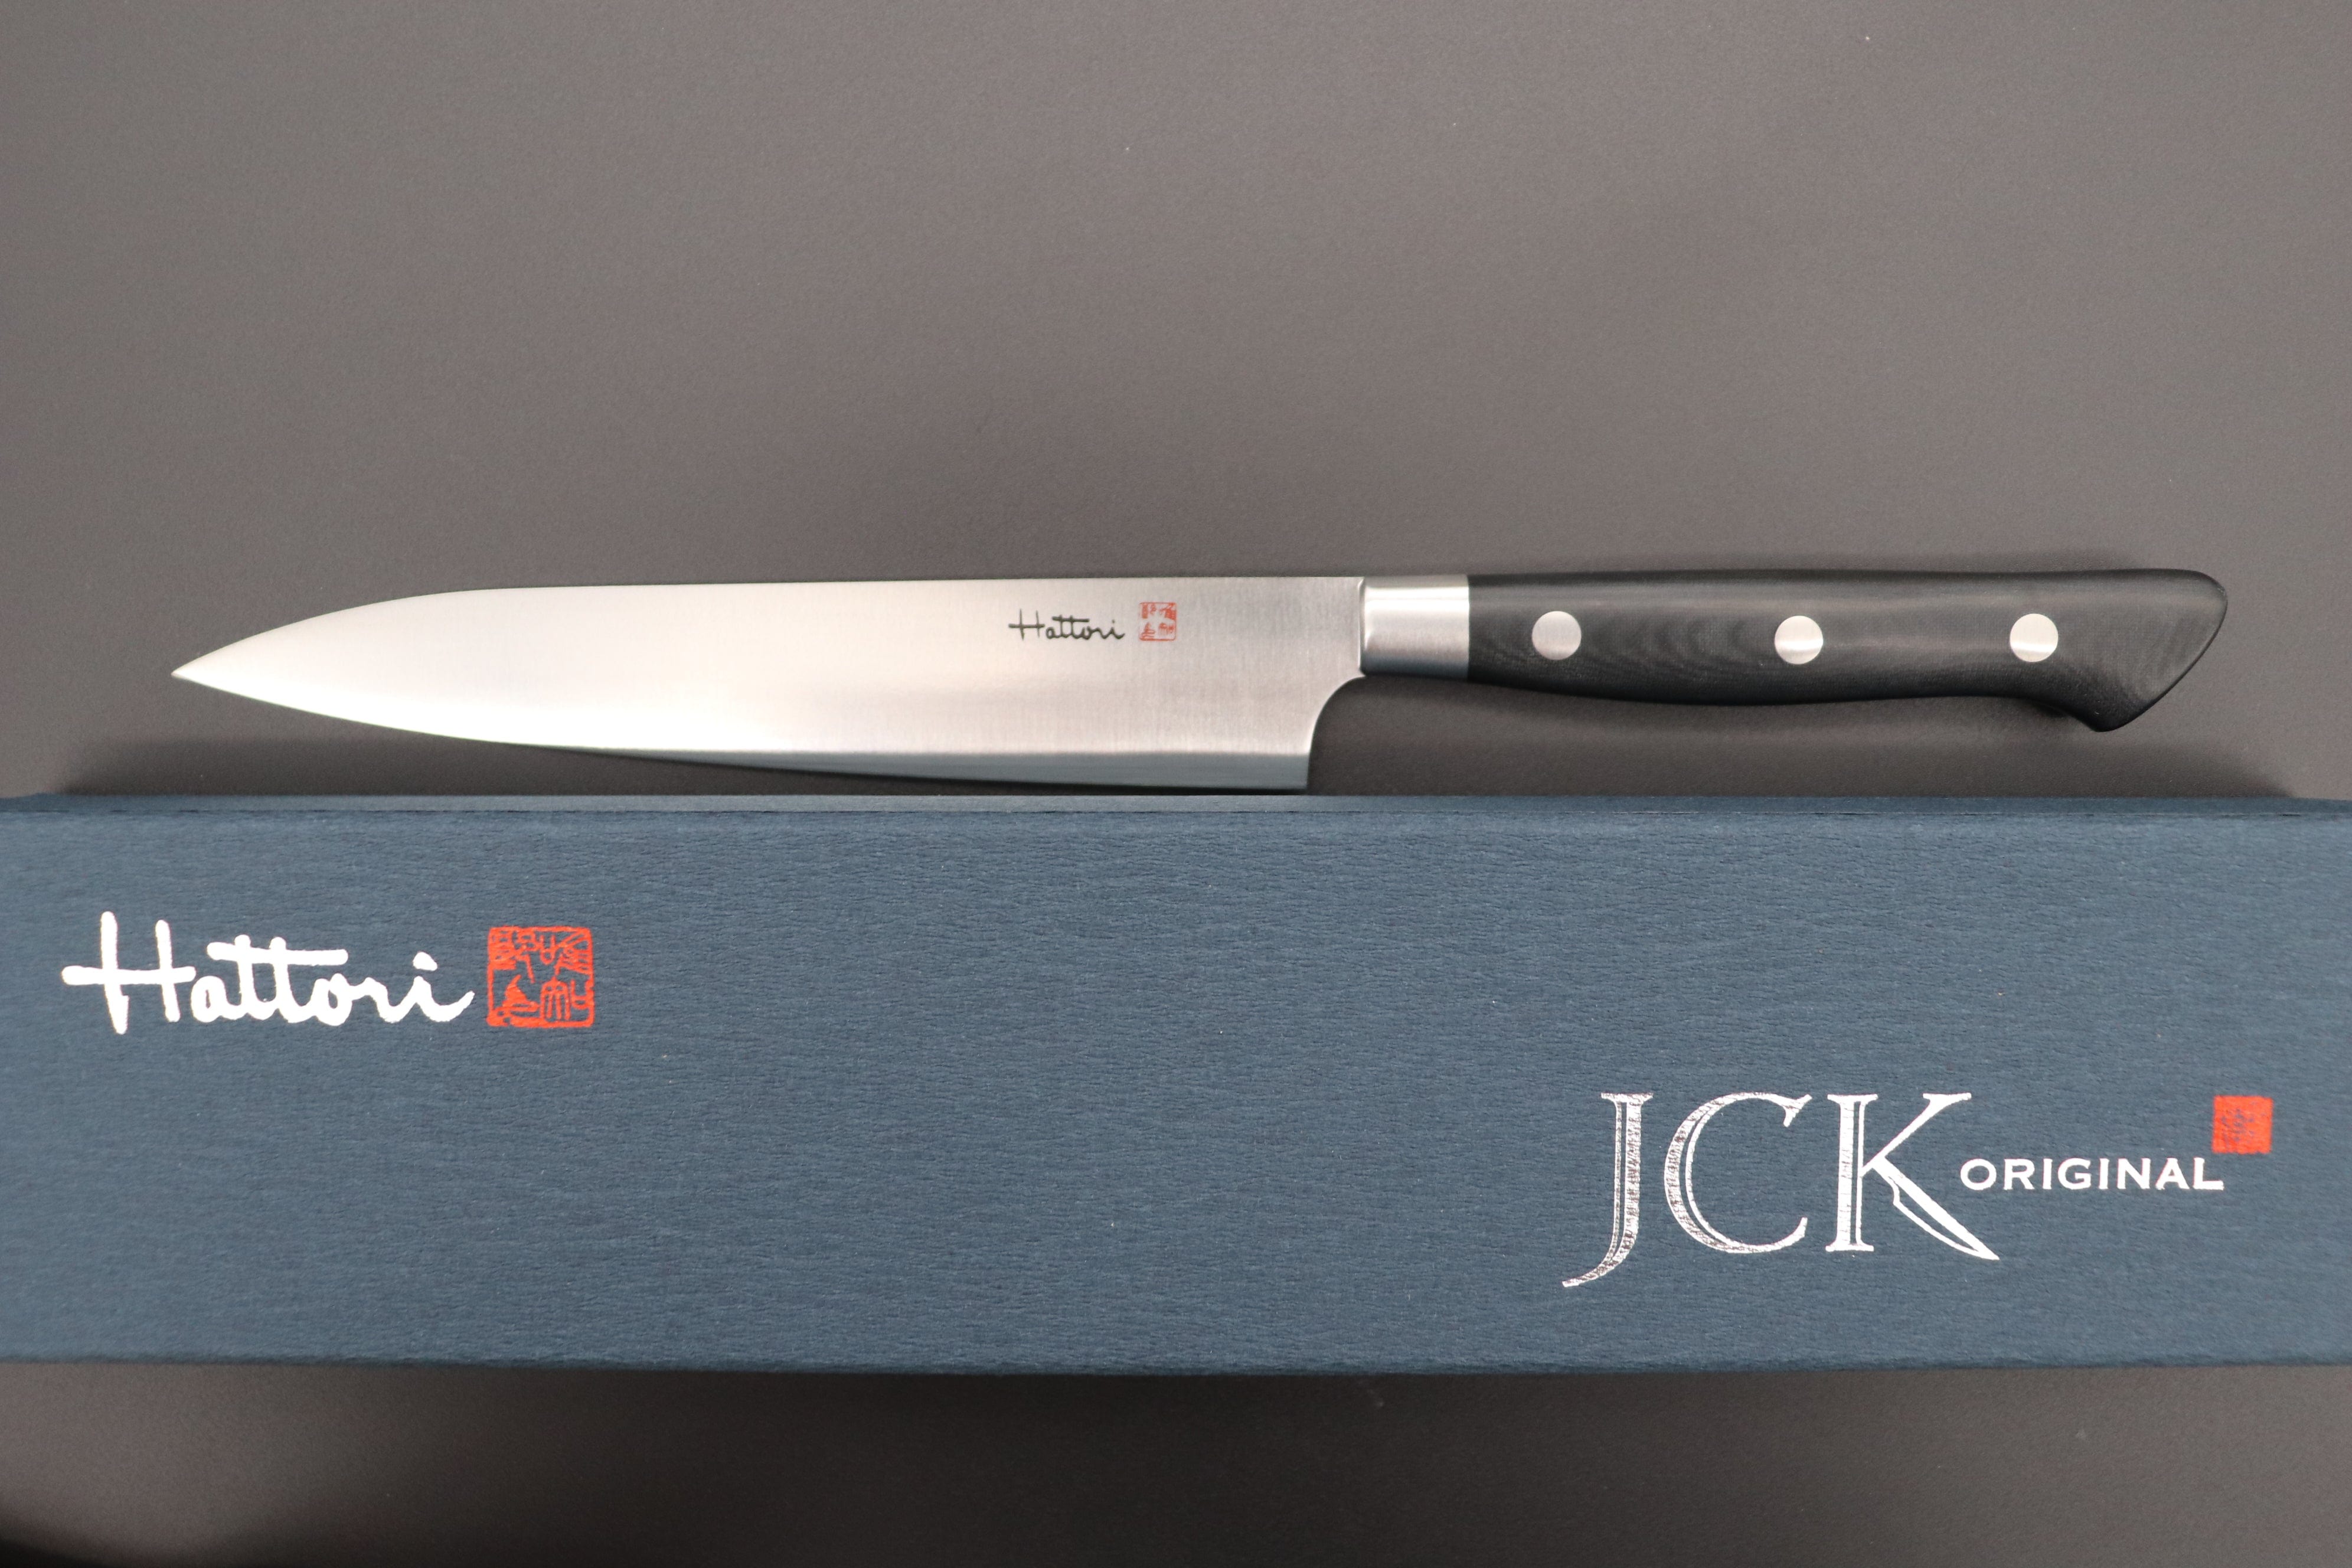 Hattori Forums FH Series Limited Edition Parer (Dupont Corian® Handle)